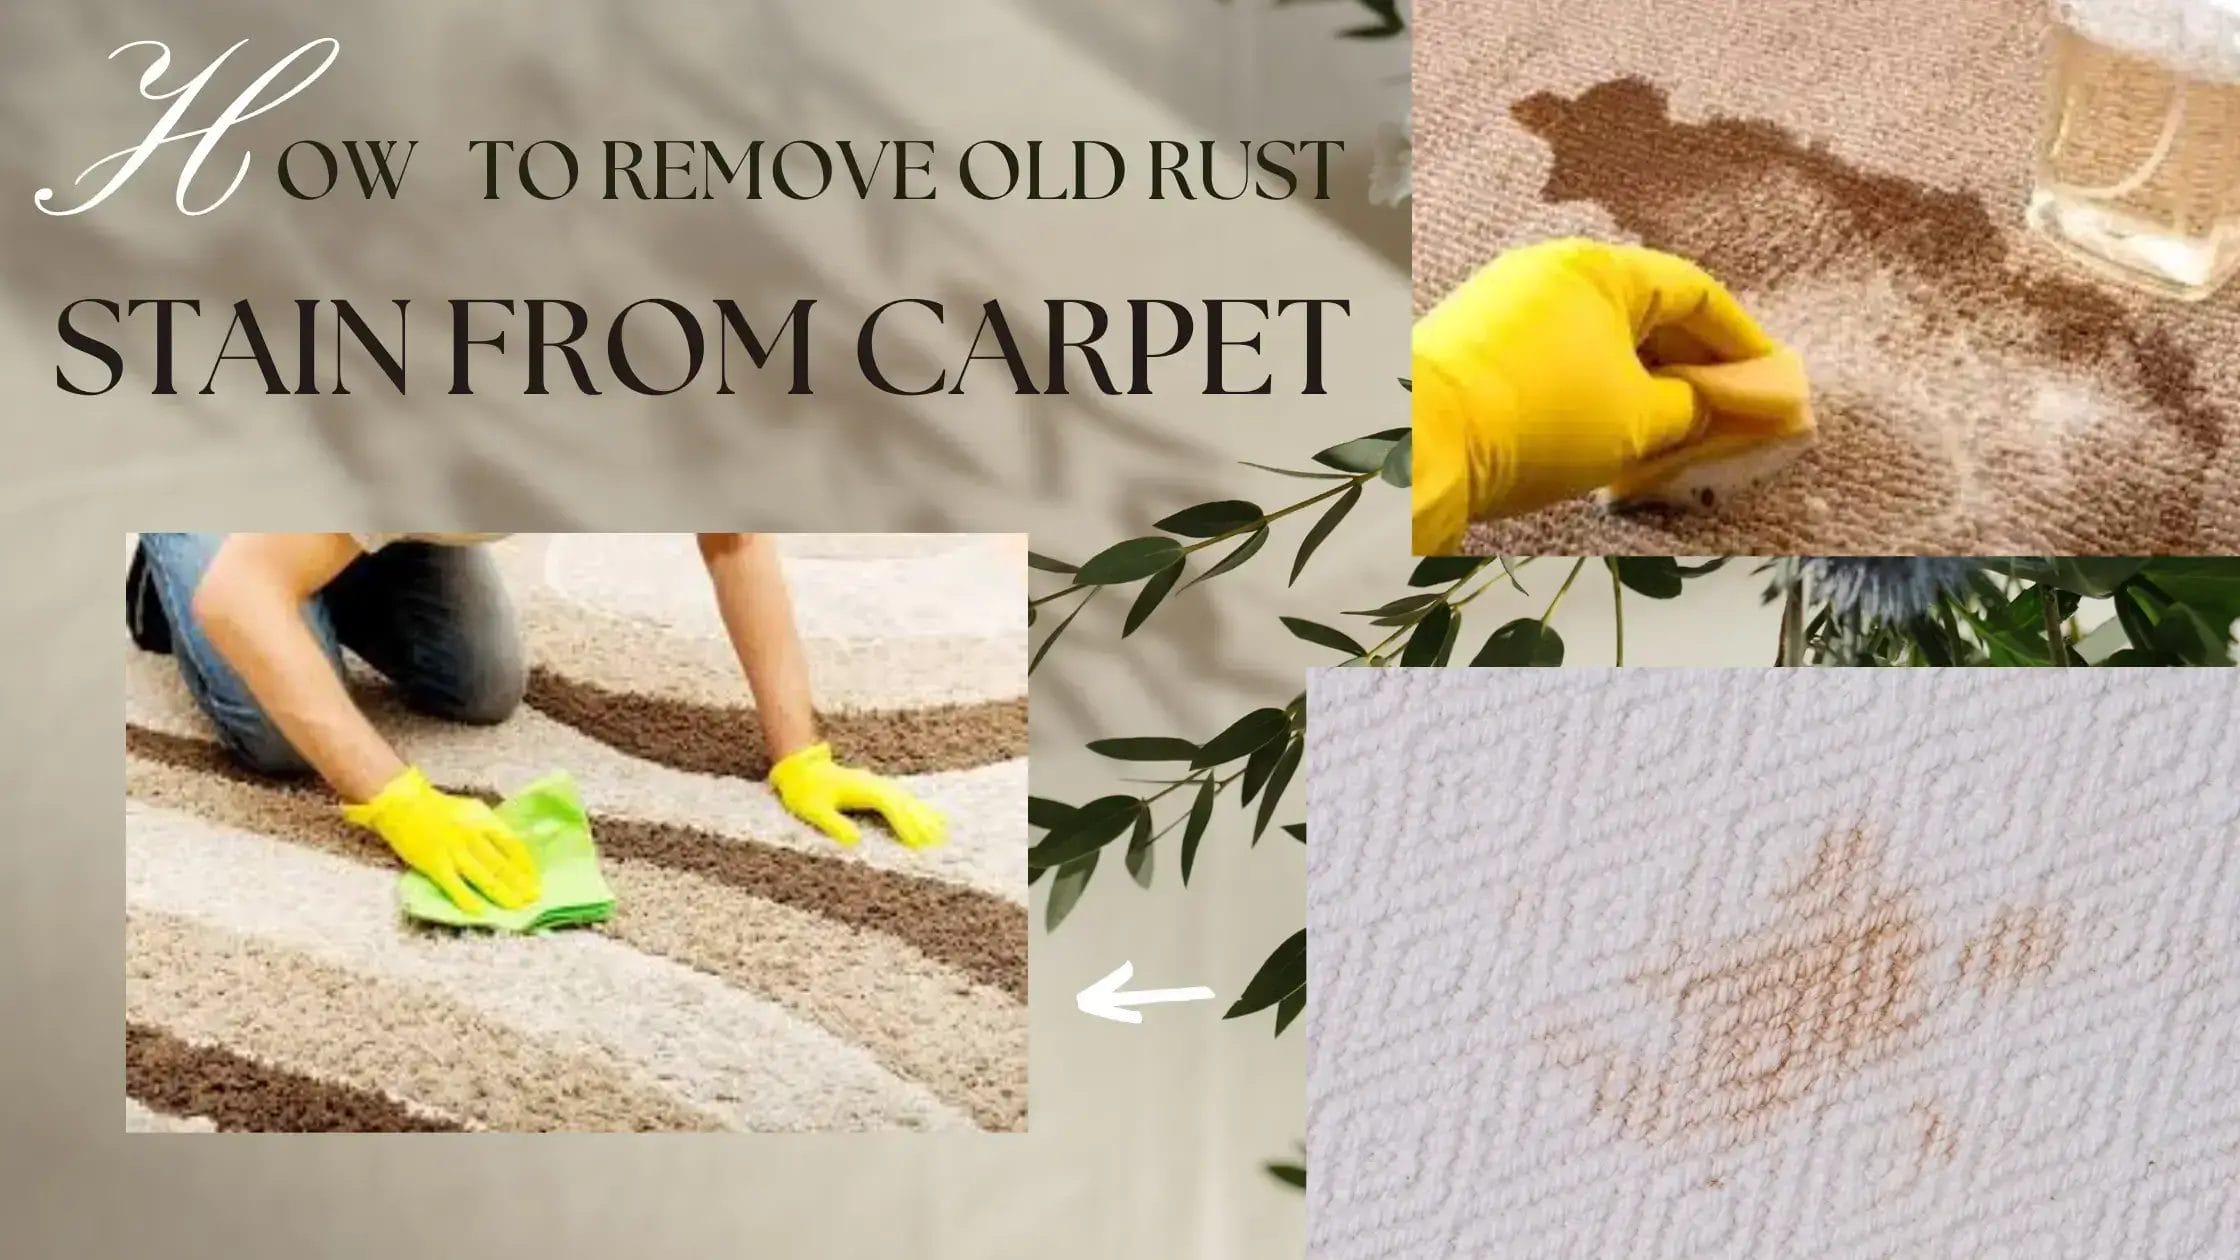 How to Remove Old Rust Stain from Carpet